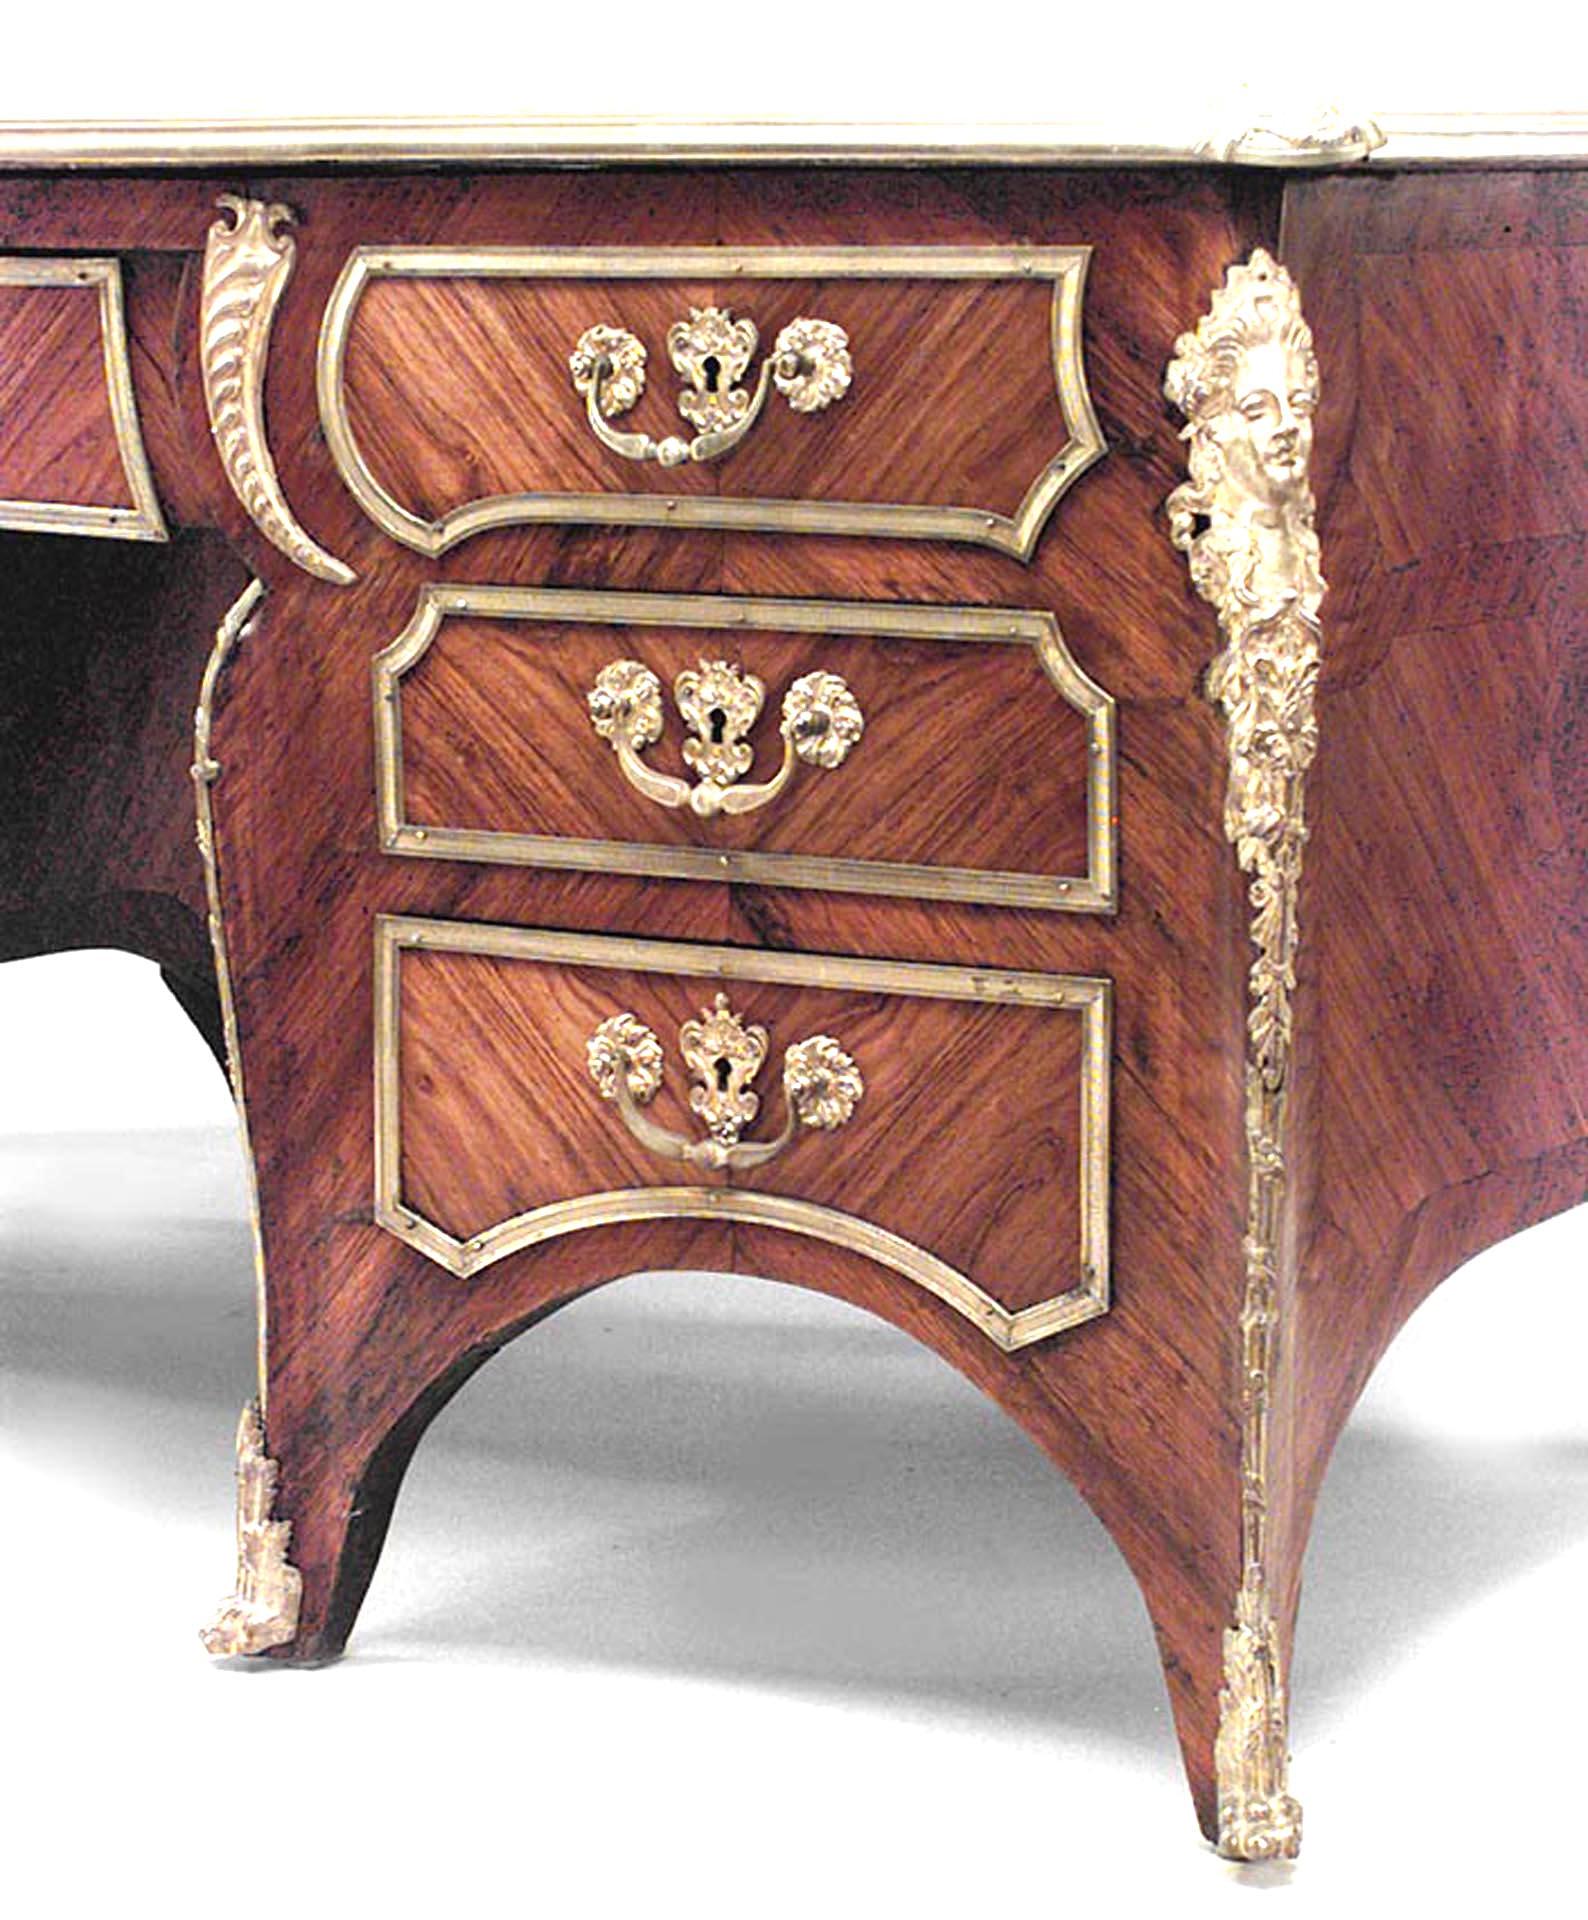 French Louis XV style (19th Century) kingwood and bronze trimmed kneehole desk with green leather top.
